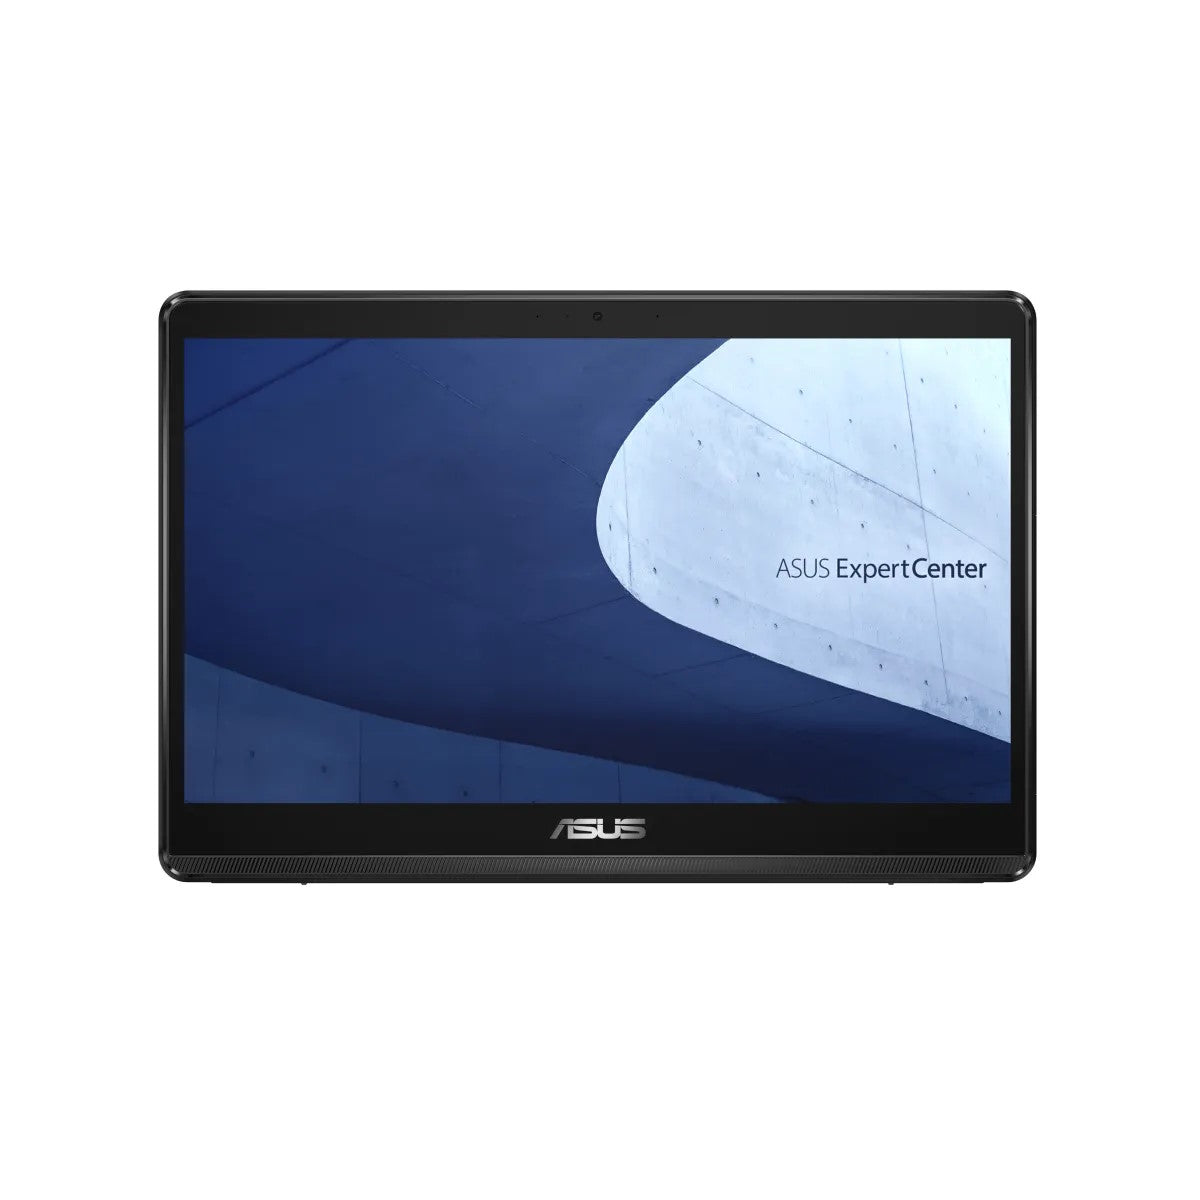 ASUS PC AIO 15,6" TOUCH Expertcenter E1 N4500 4GB 256GB SSD FREEDOS [E1600WKAT-BA027M]